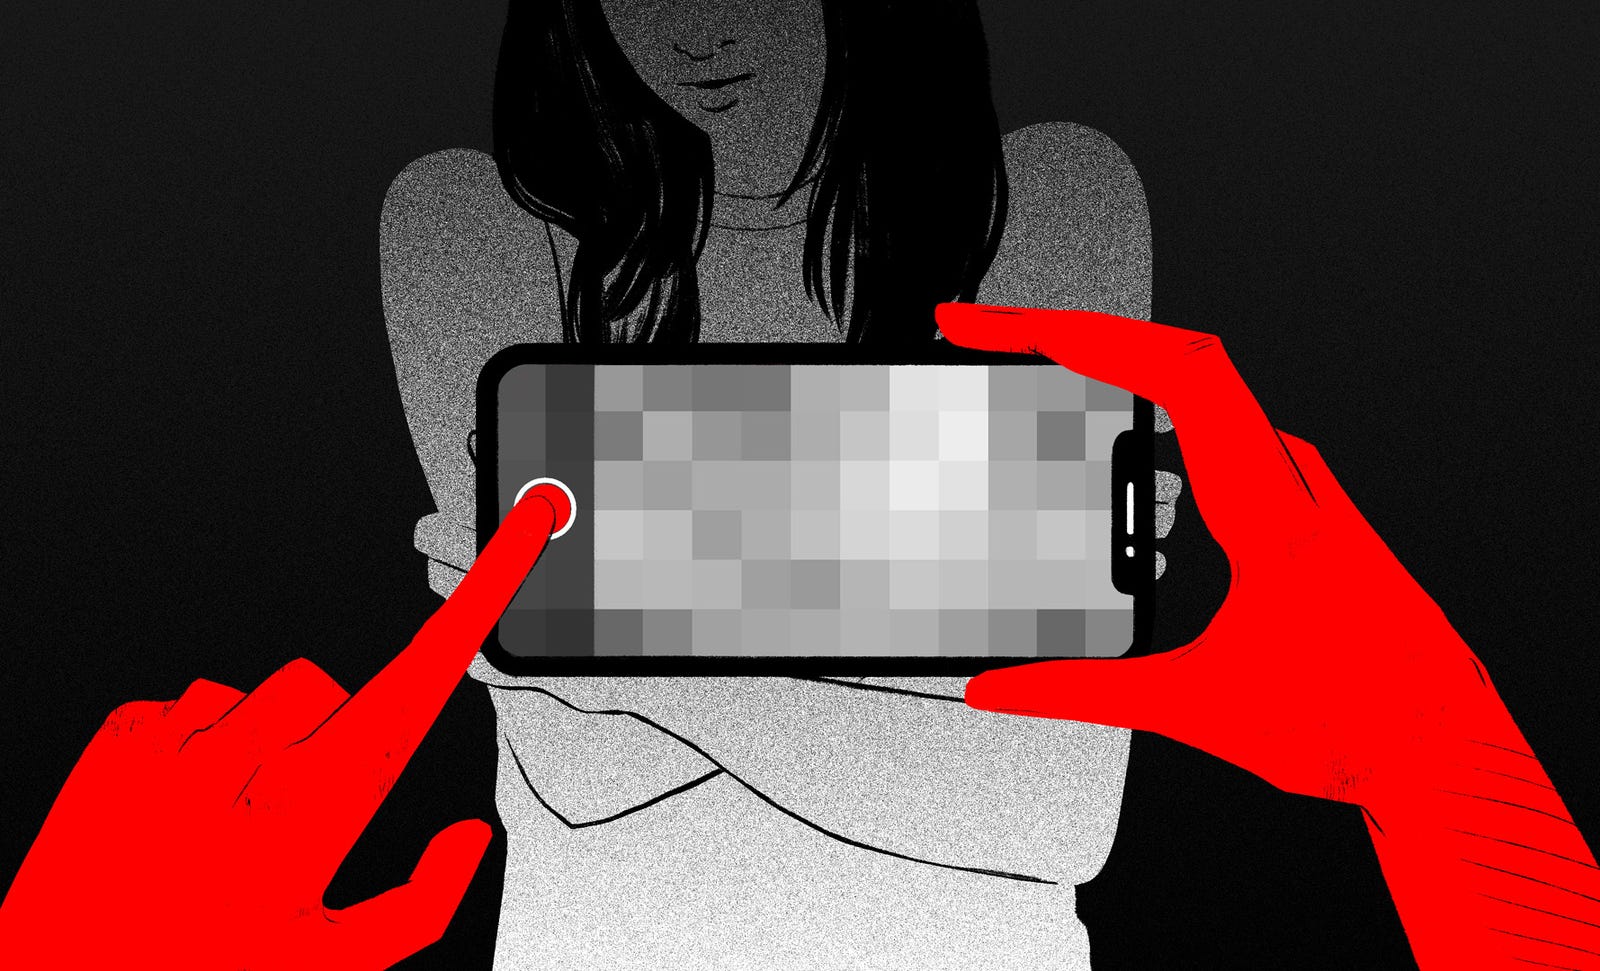 Calls Boyfriend While - What to Do If You're a Victim of Revenge Porn